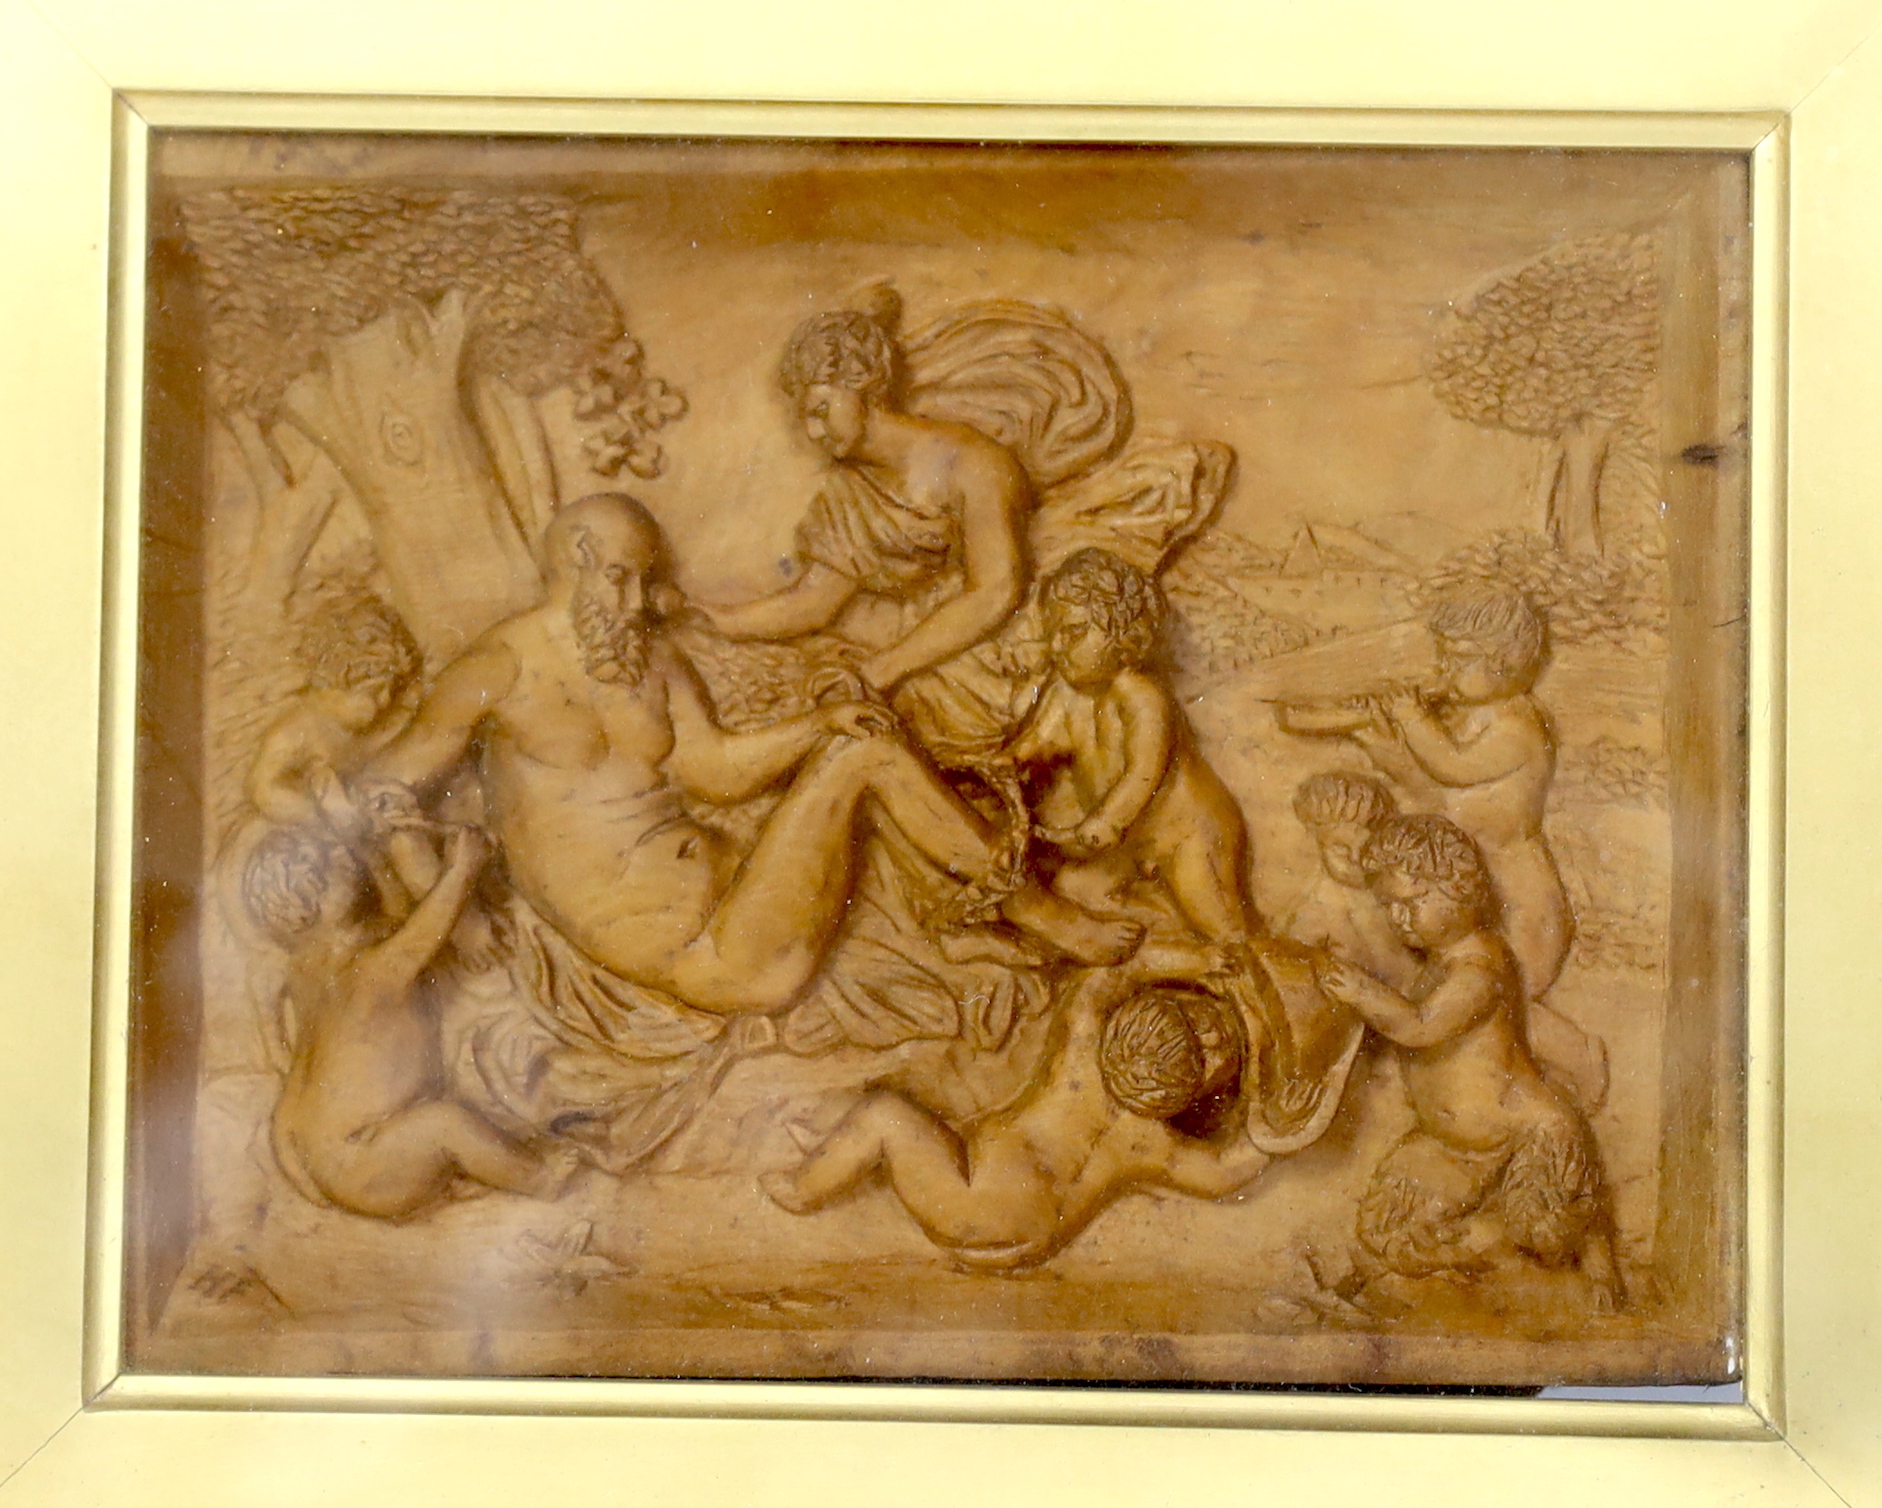 A 19th century framed carved wood panel depicting Bacchanalians, 12x16cm